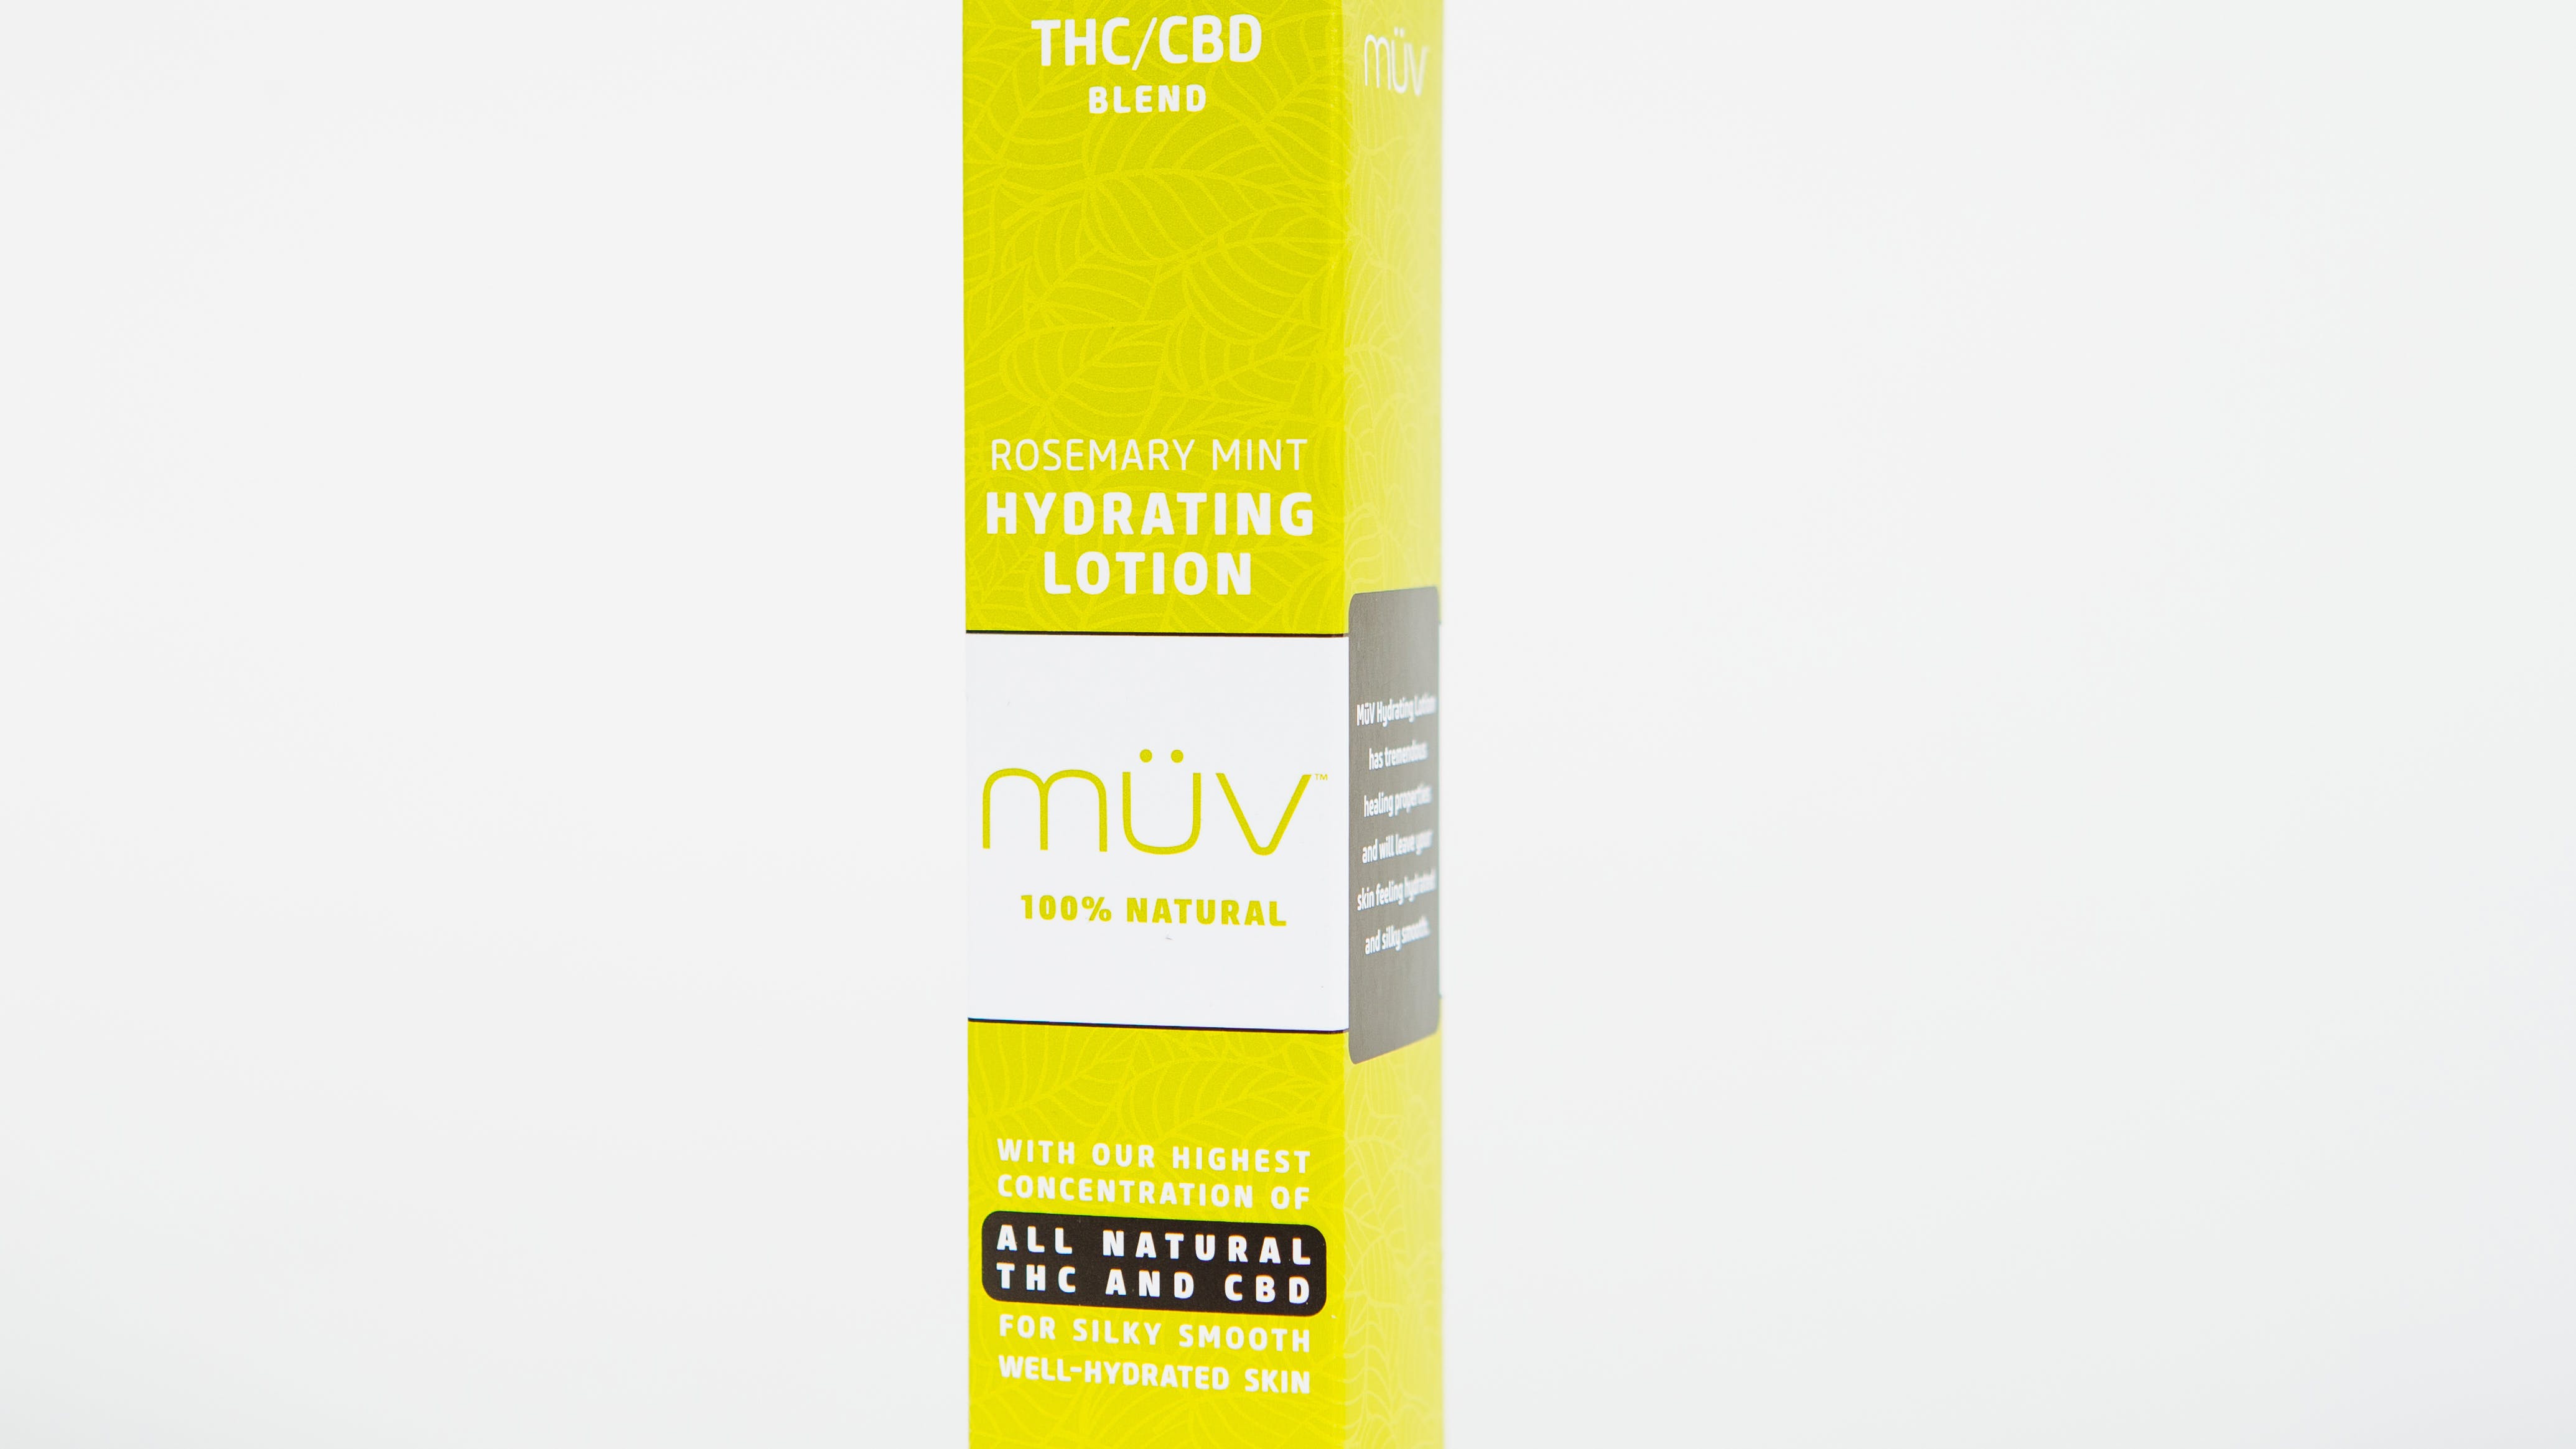 topicals-muv-rosemary-mint-hydrating-lotion-thccbd-120mg-50ml